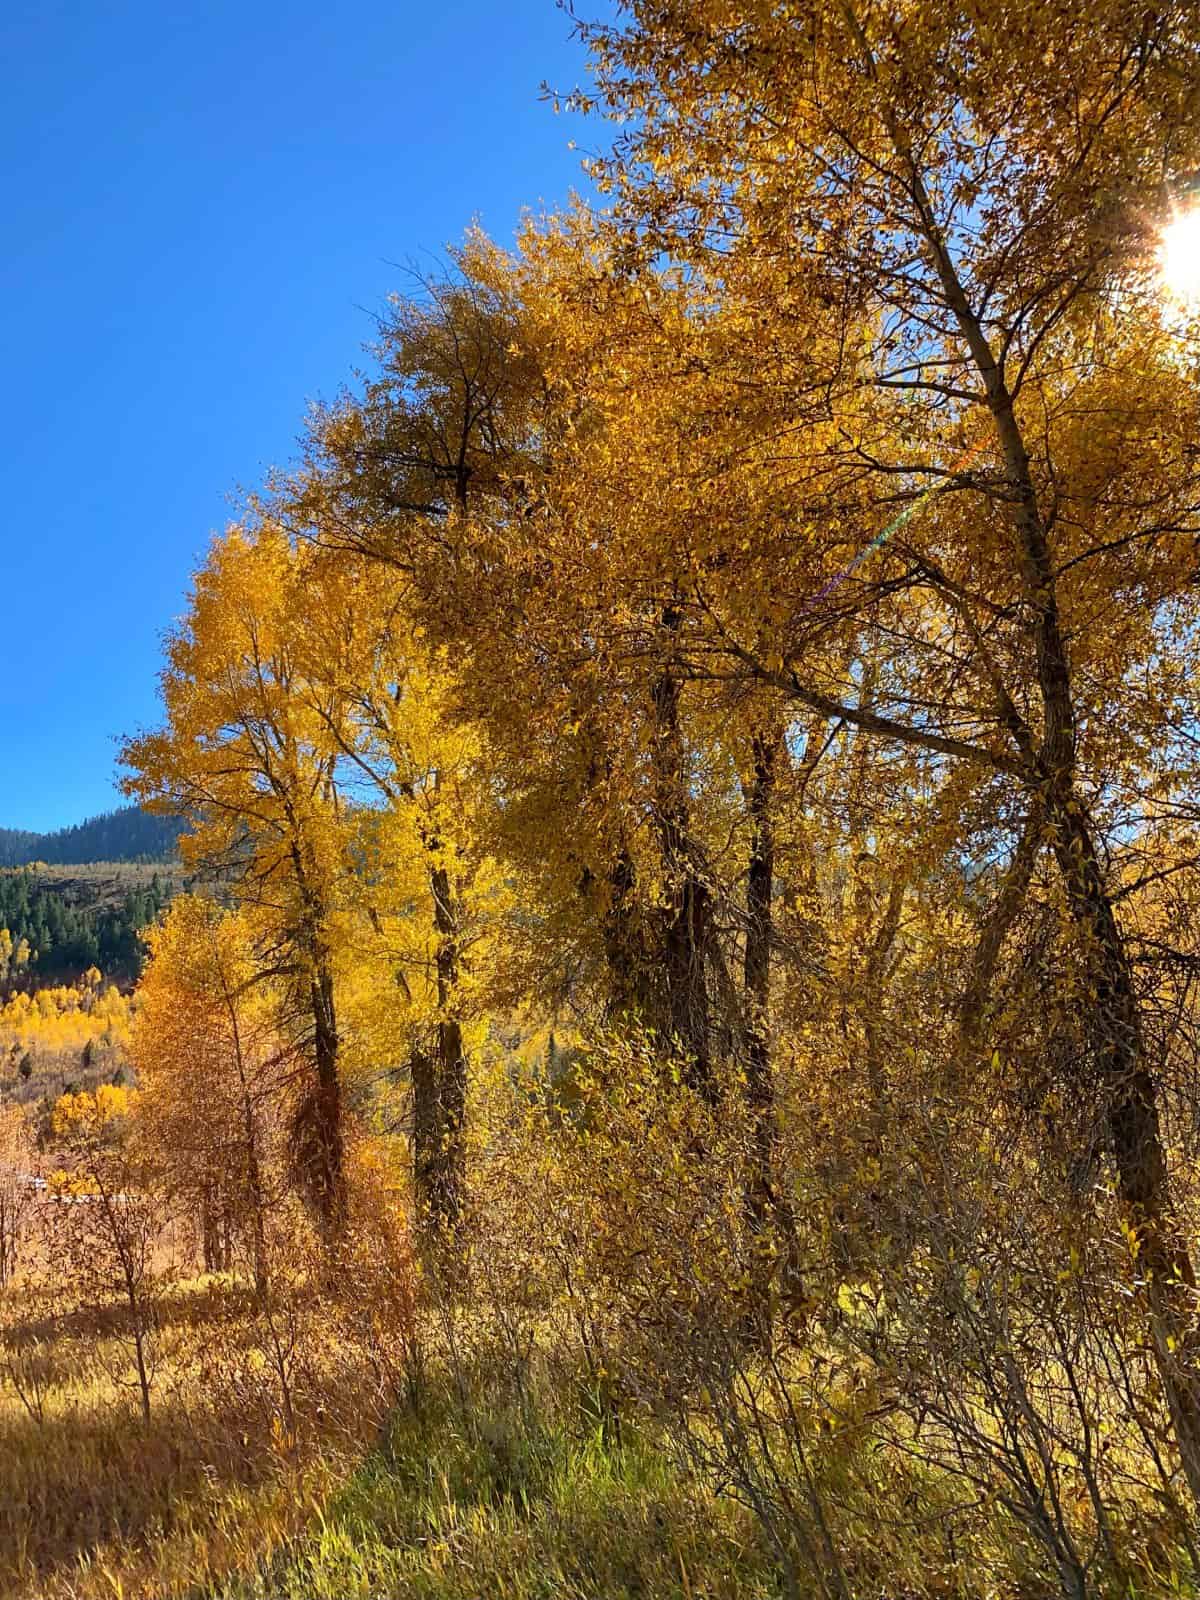 Things to do in Park City in the fall - drive the Mirror Lake Scenic Byway